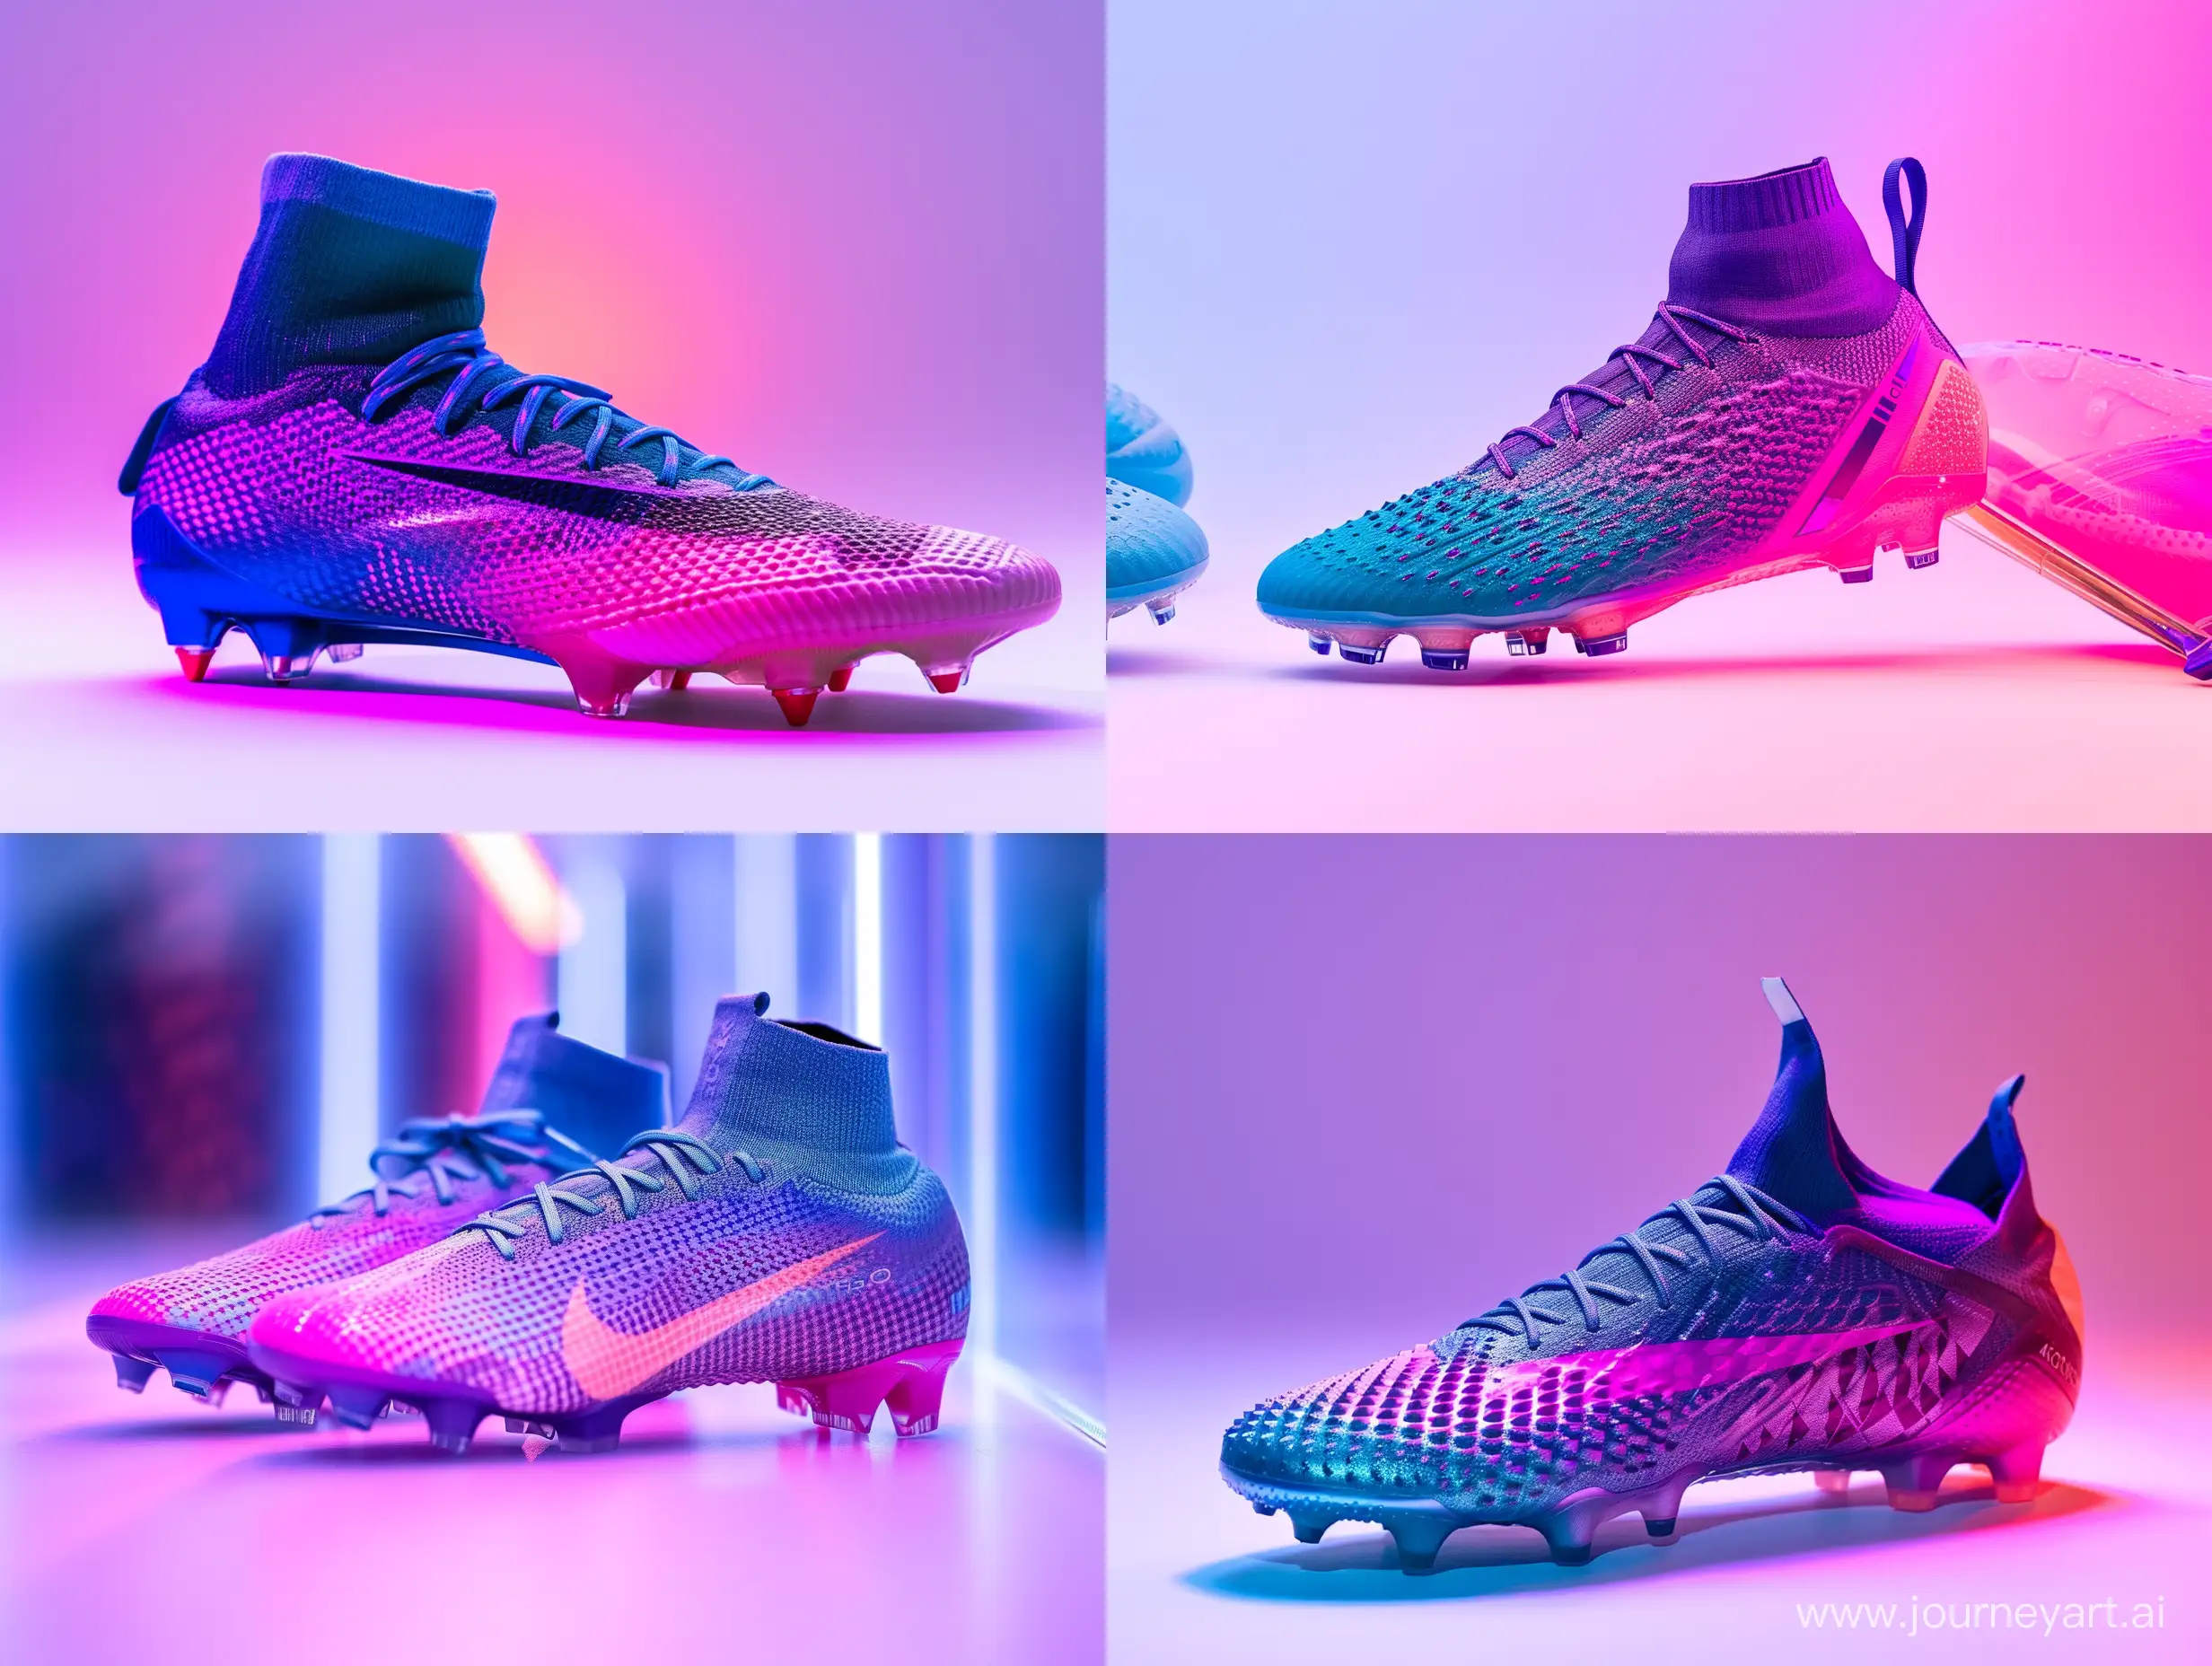 Vibrant-Football-Collective-HighDefinition-4K-Profile-Photo-with-Purple-Blue-and-Pink-Colors